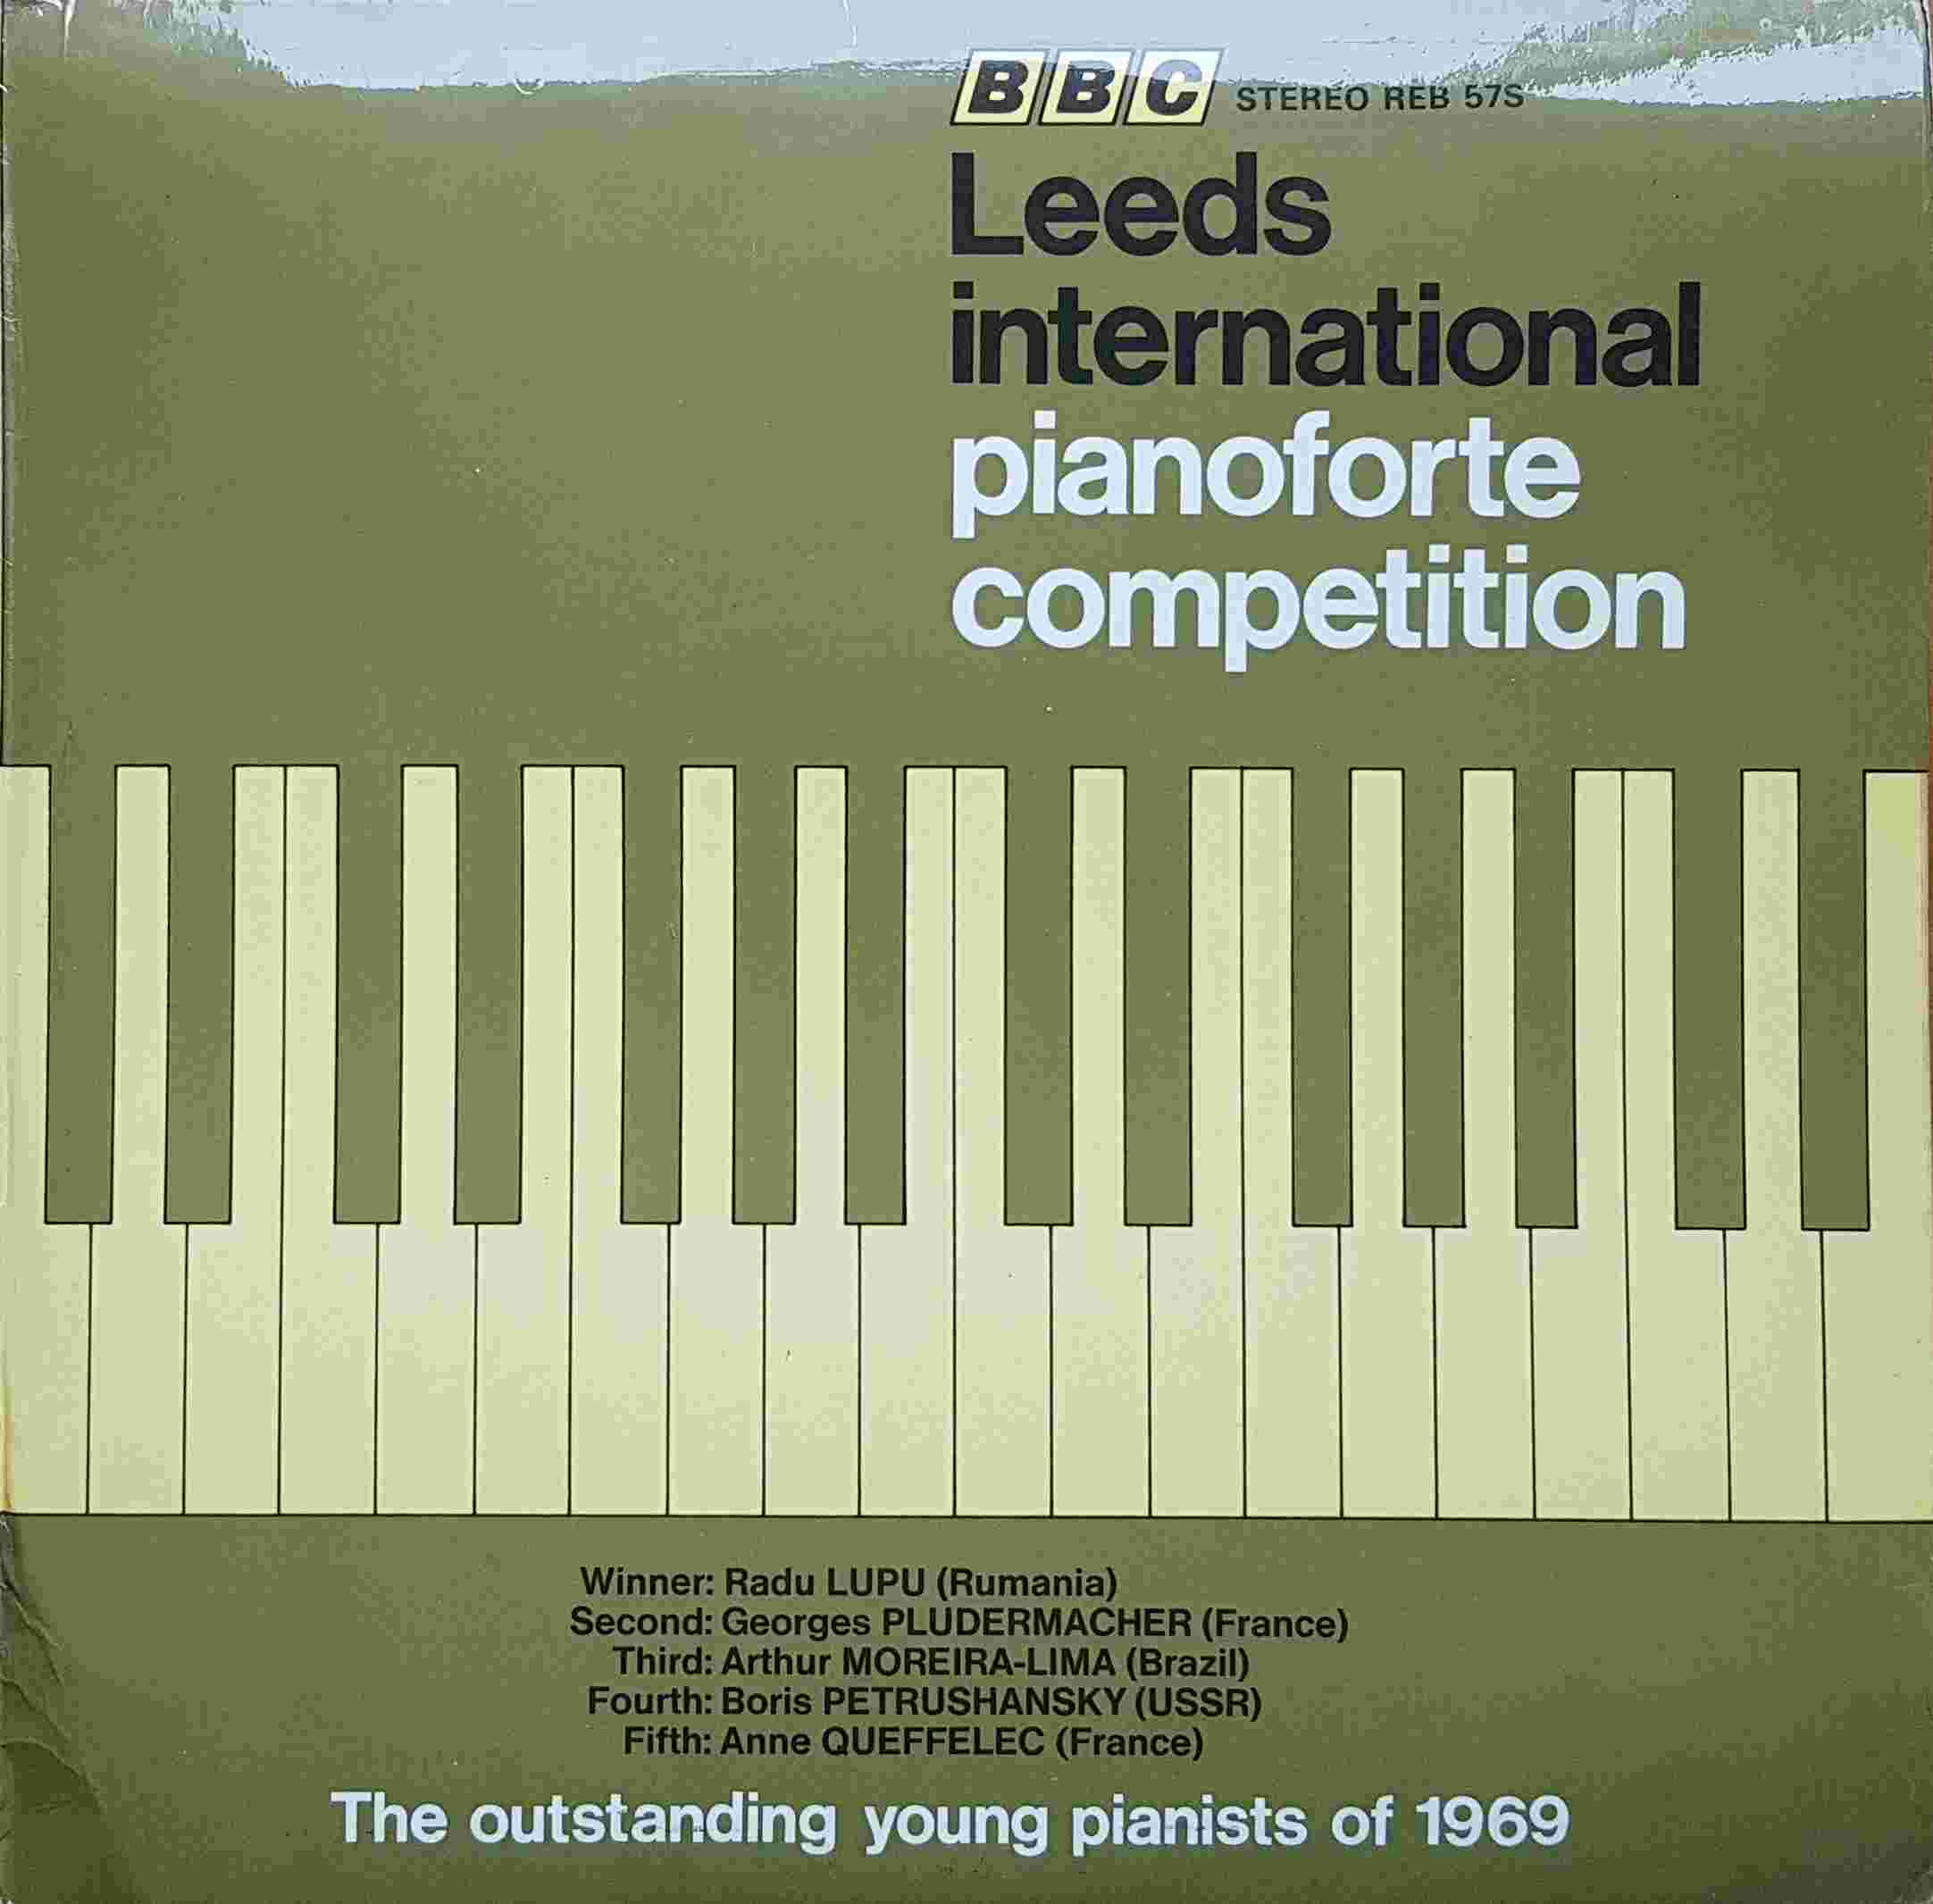 Picture of REB 57 Leeds international pianoforte competition by artist Various from the BBC albums - Records and Tapes library